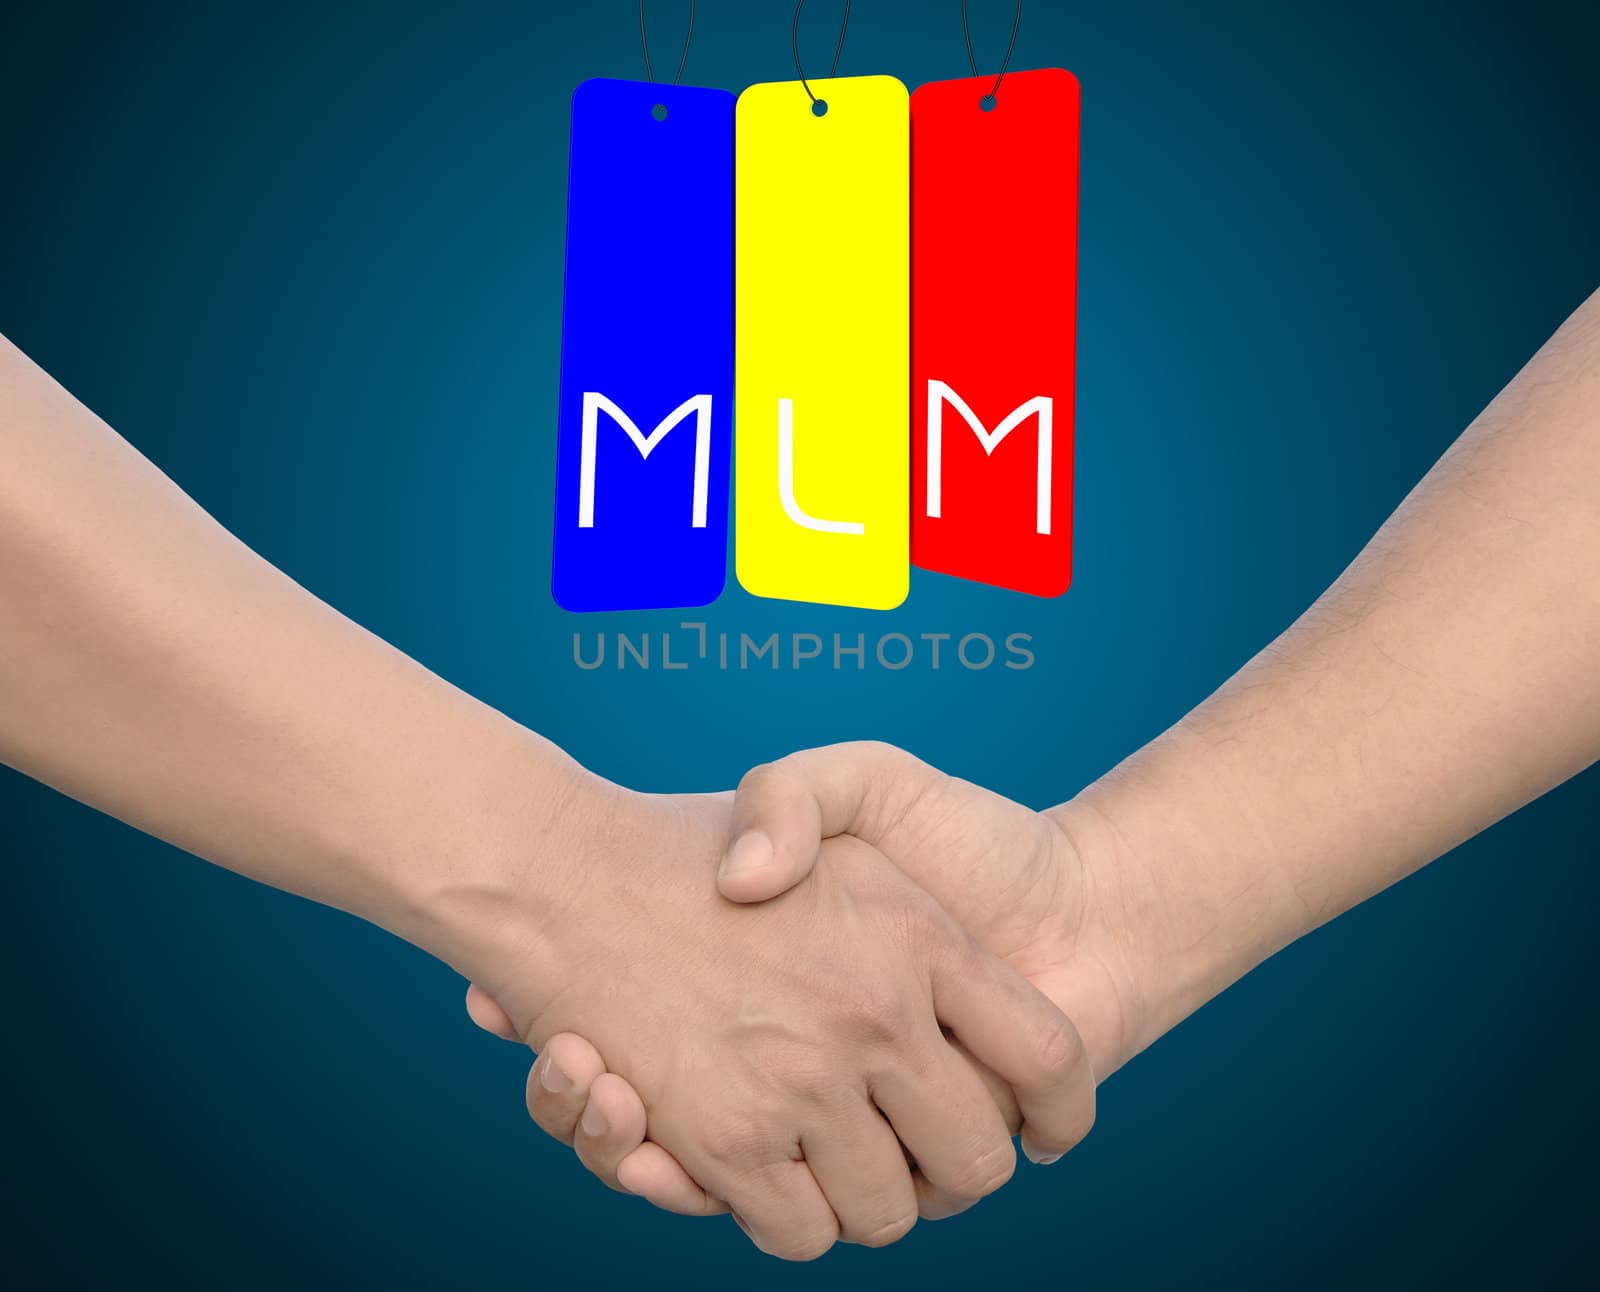 Hand shake or hand in hand with the word MLM on iron tag